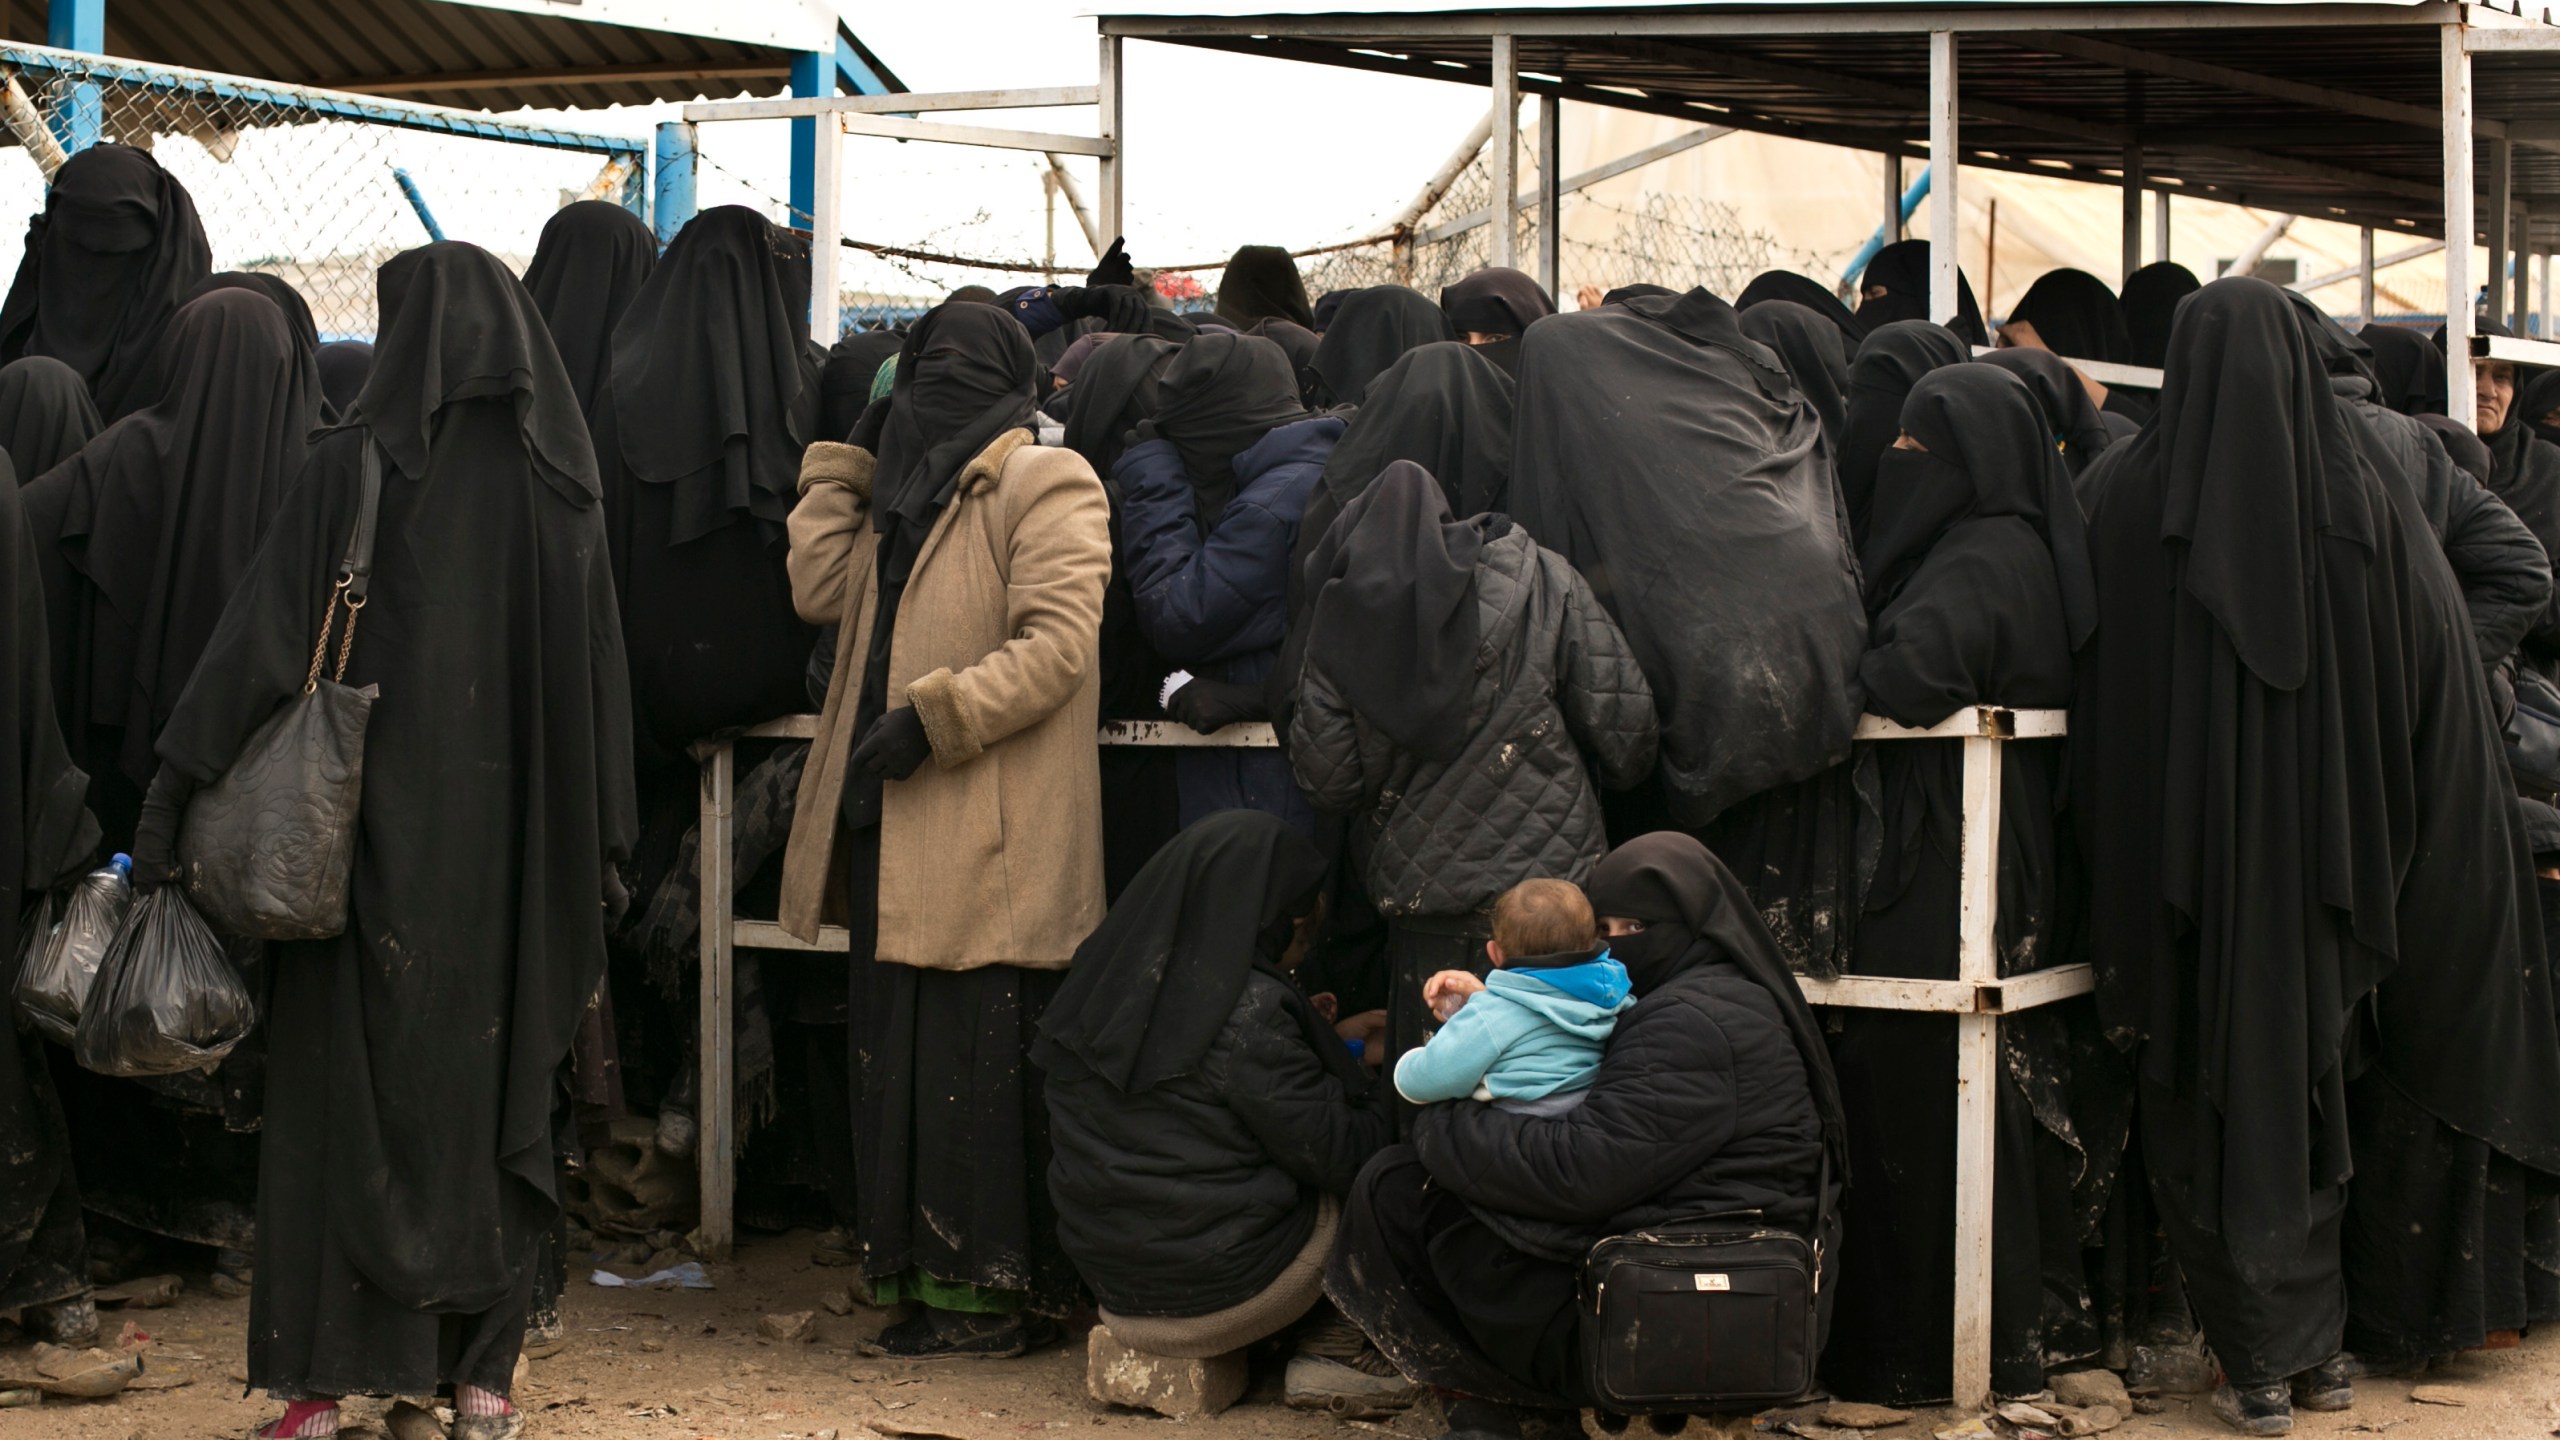 FILE - Women residents from former Islamic State-held areas in Syria line up for aid supplies at Al-Hol camp in Hassakeh province, Syria, March 31, 2019. Syria’s civil war has entered its 14th year on Friday March 15, 2024, a somber anniversary in a long-frozen conflict. The country is effectively carved up into areas controlled by the Damascus government, various opposition groups and Kurdish forces. (AP Photo/Maya Alleruzzo, File)